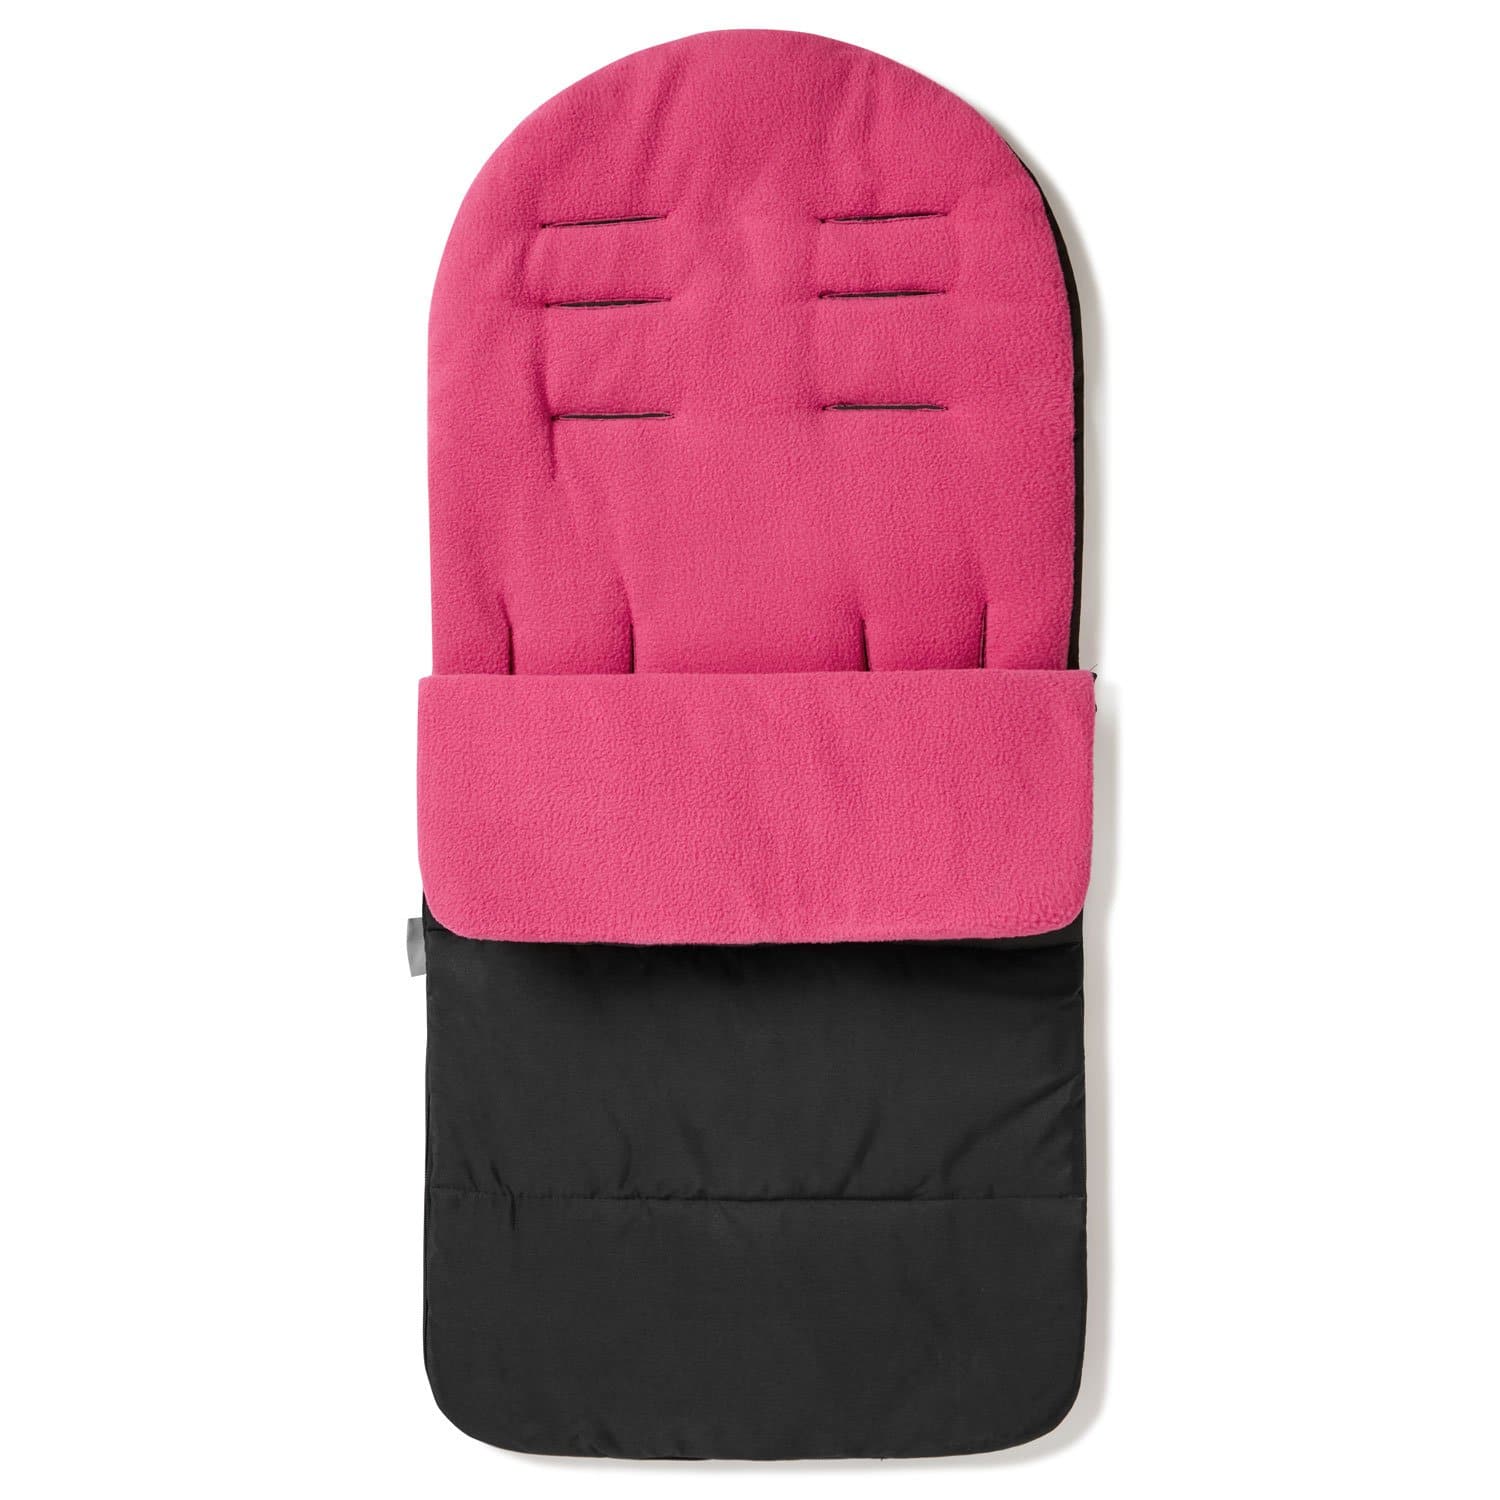 Premium Footmuff / Cosy Toes Compatible with Jane - Pink Rose / Fits All Models | For Your Little One